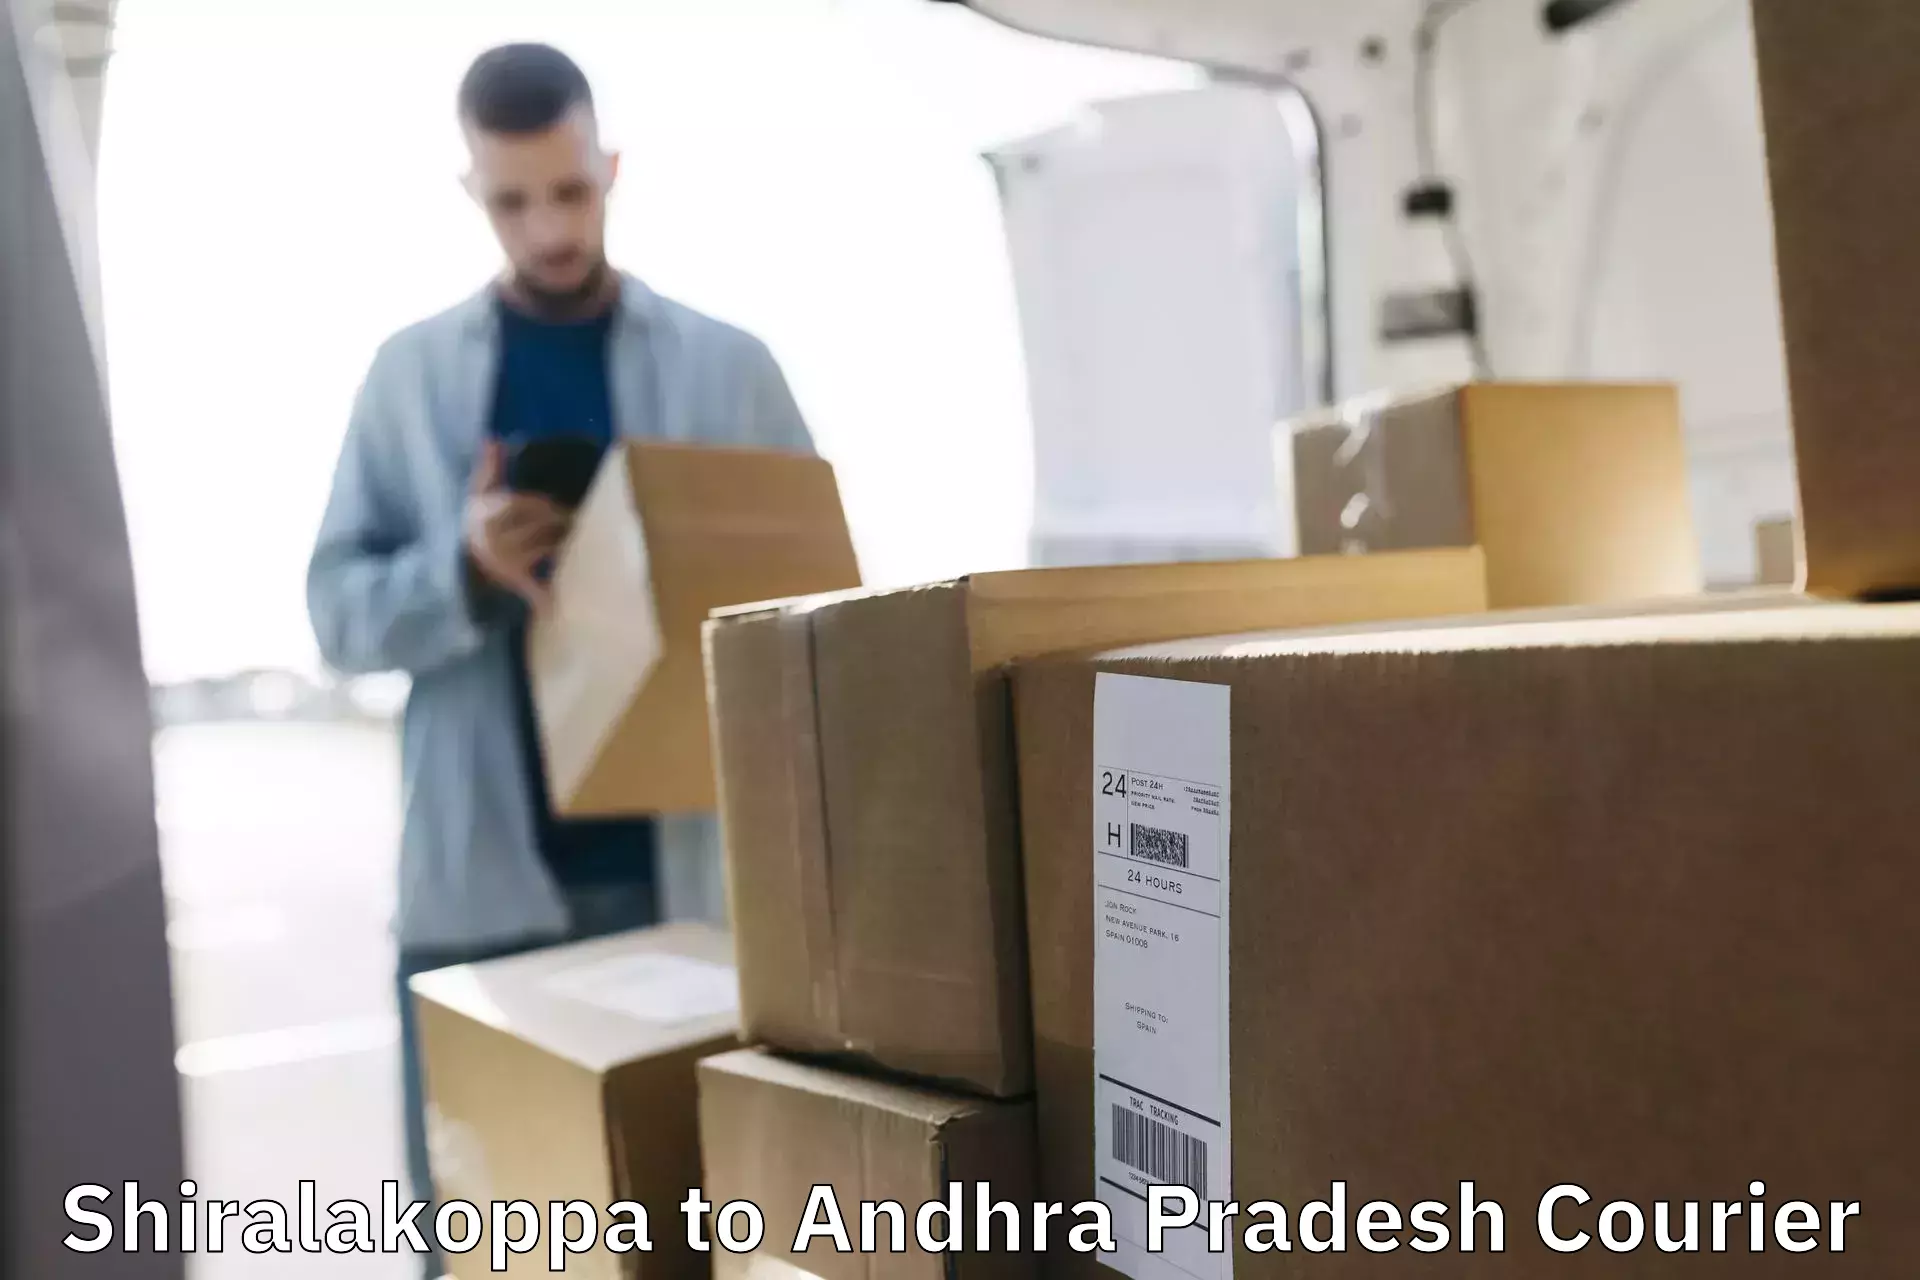 Expedited parcel delivery in Shiralakoppa to Gudivada